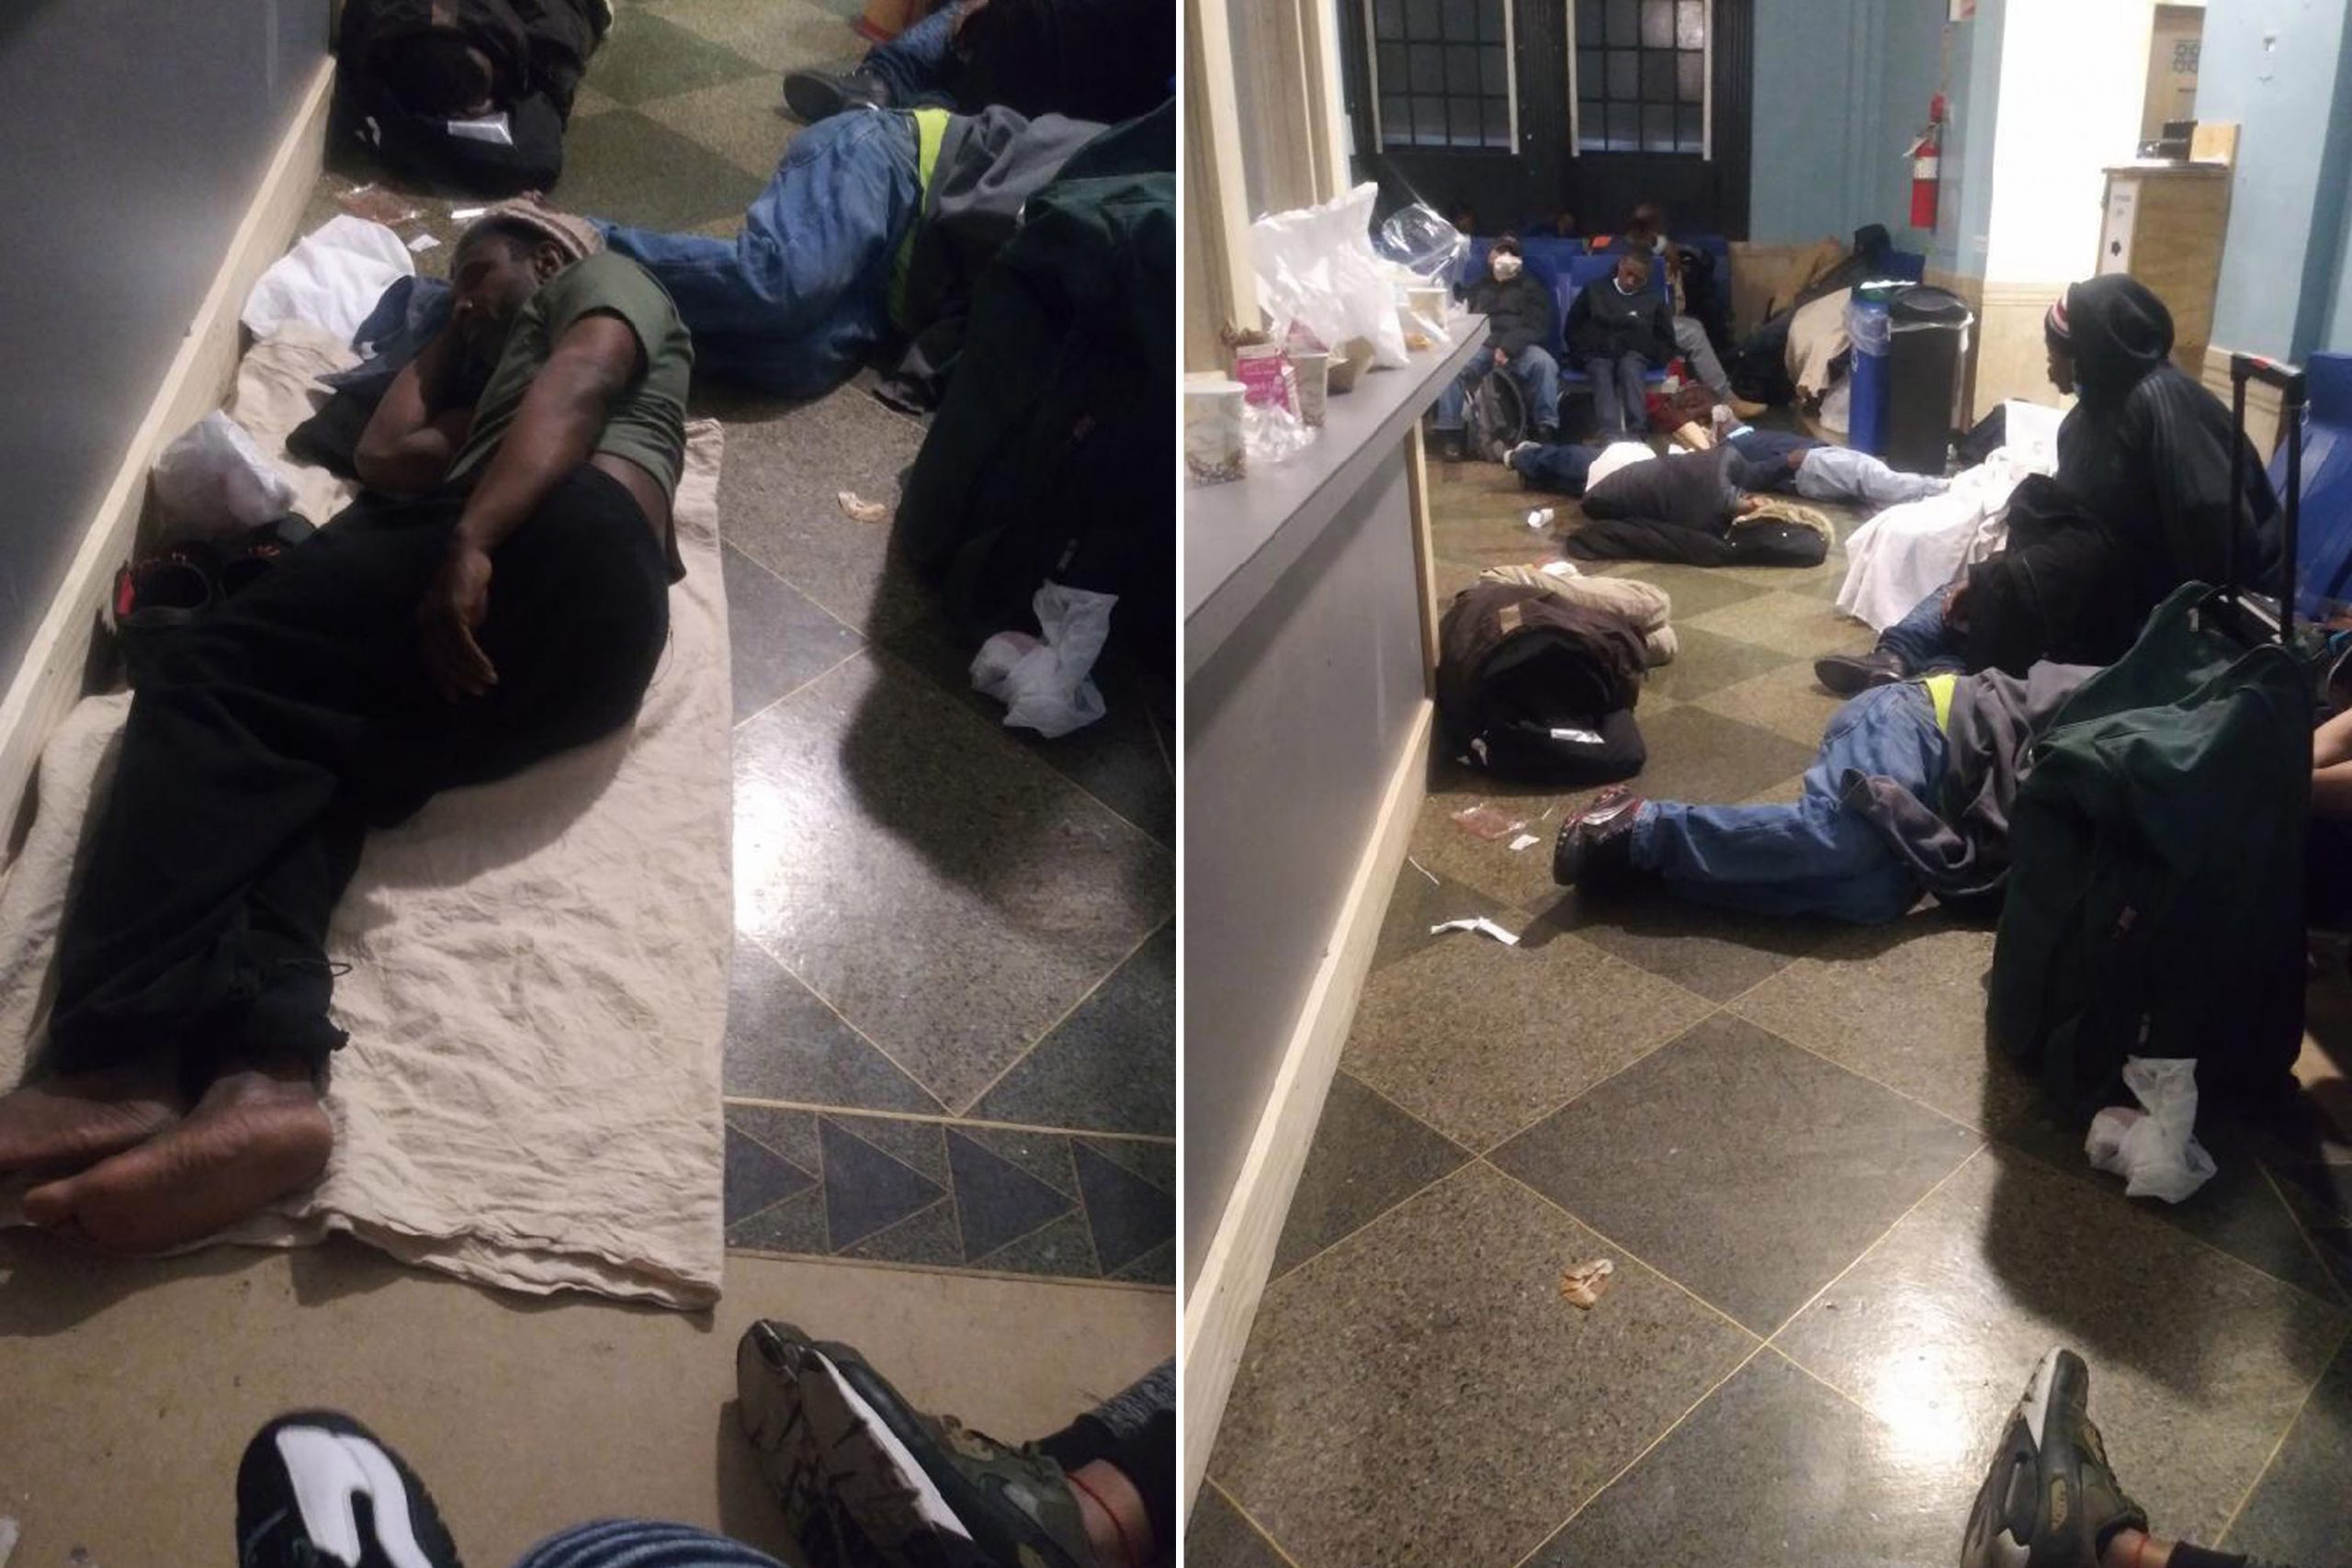 Men in homeless shelter trapped next to coronavirus carriers, K2 zombies